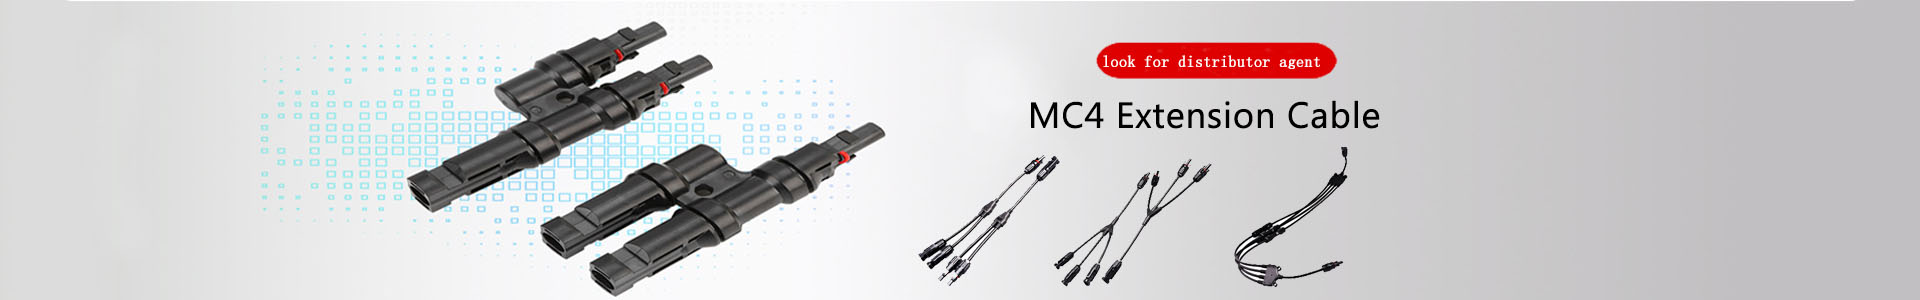 mc4 female 10awg black solar cable-MC4 Extension Cable-Solar | solar connector,solar branch connector,diode fuse connector,MC4 extnsion cable,H1Z2Z2 solar cable, UL4703 solar cable | Leading manufacturer and supplier of solar pv cables and connectors